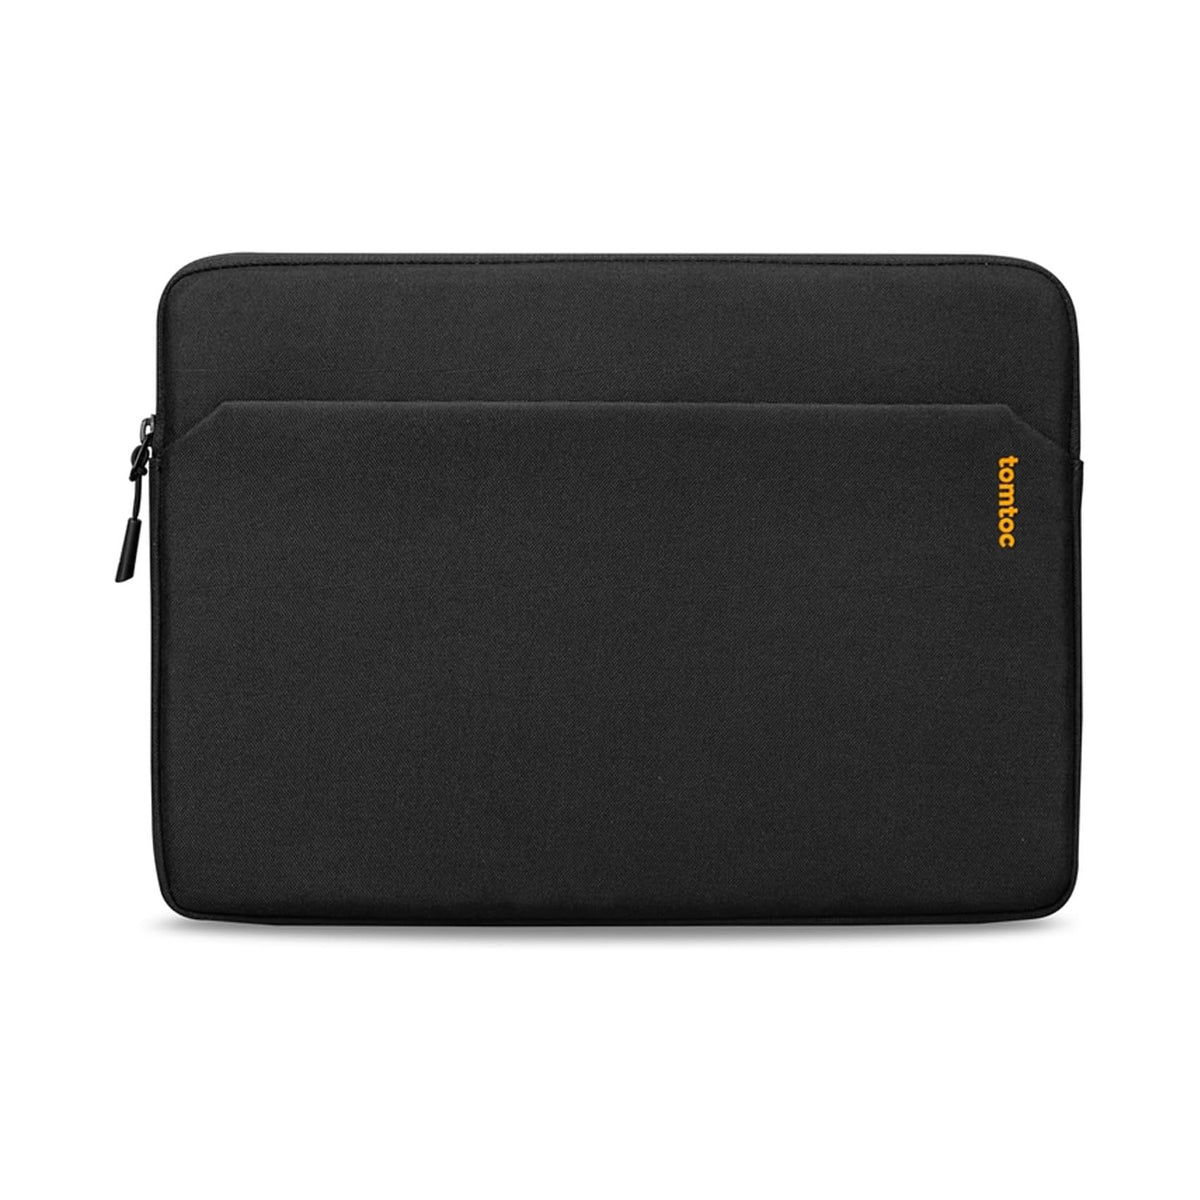 tomtoc 12.9 Inch Tablet Sleeve Bag - Pad Pro 12.9 with Magic Keyboard - Black